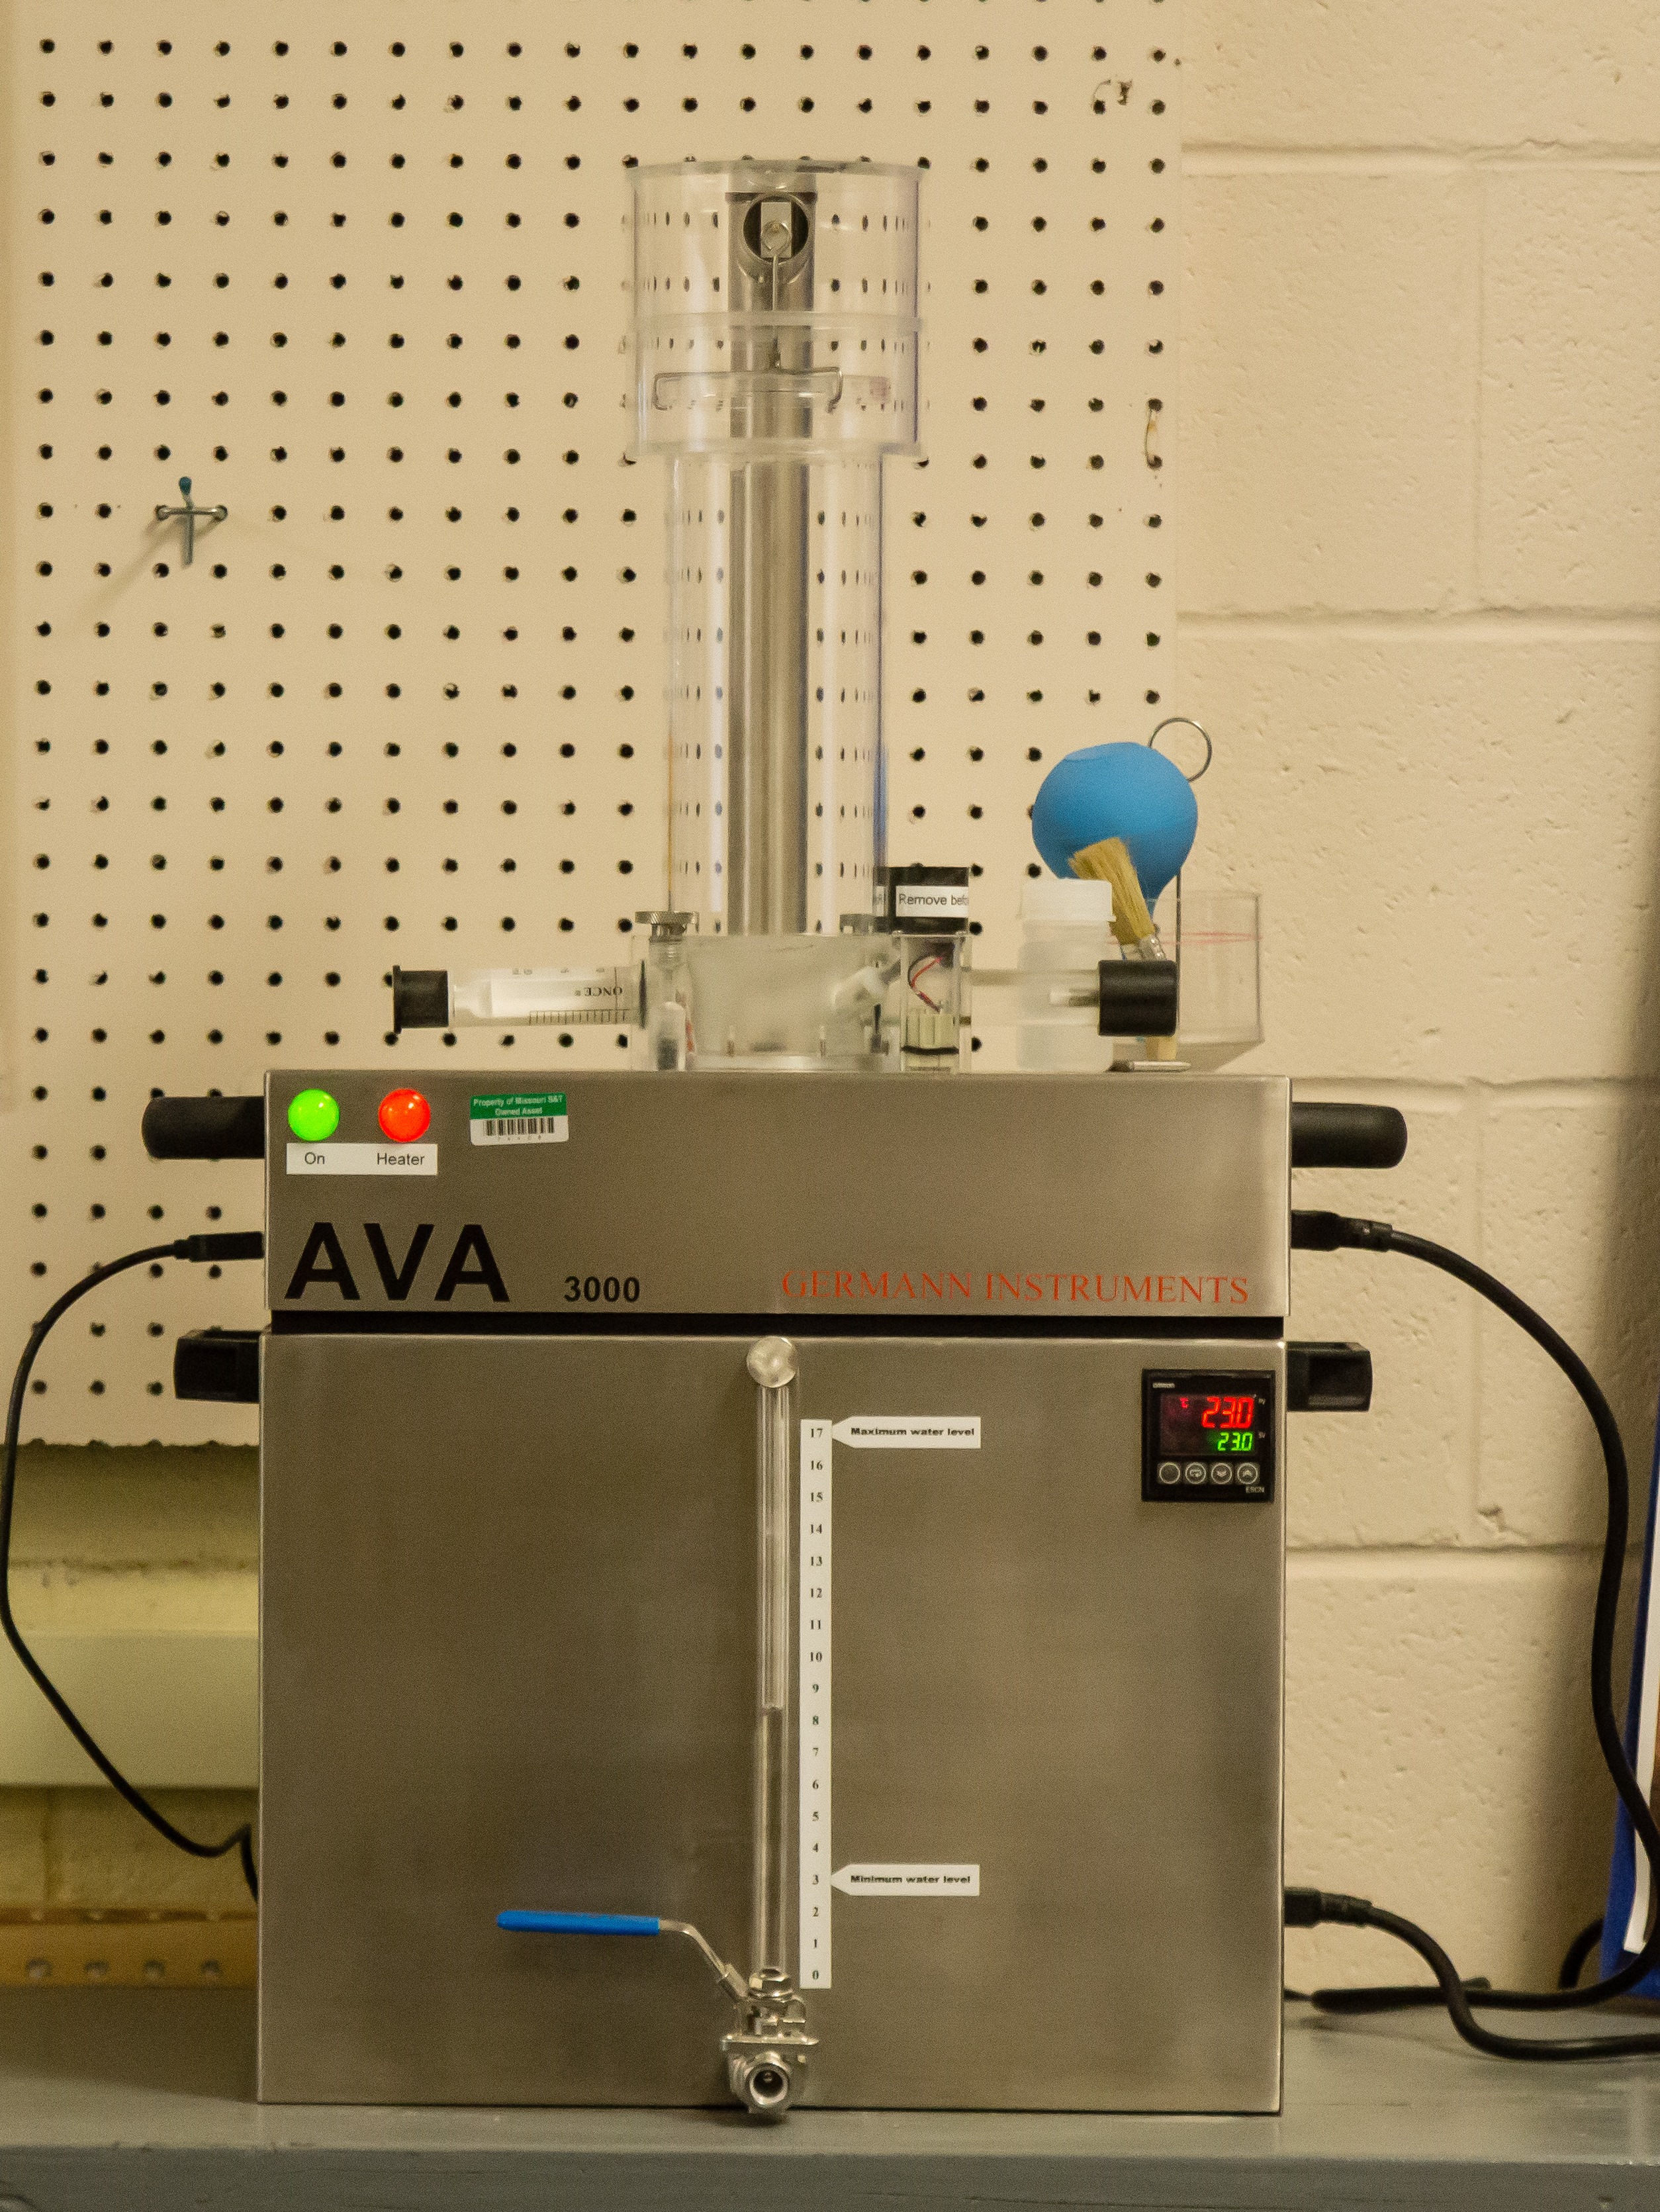 This equipment is used to measure the air-void parameters (spacing factor and specific surface) of samples of fresh air-entrained concrete.